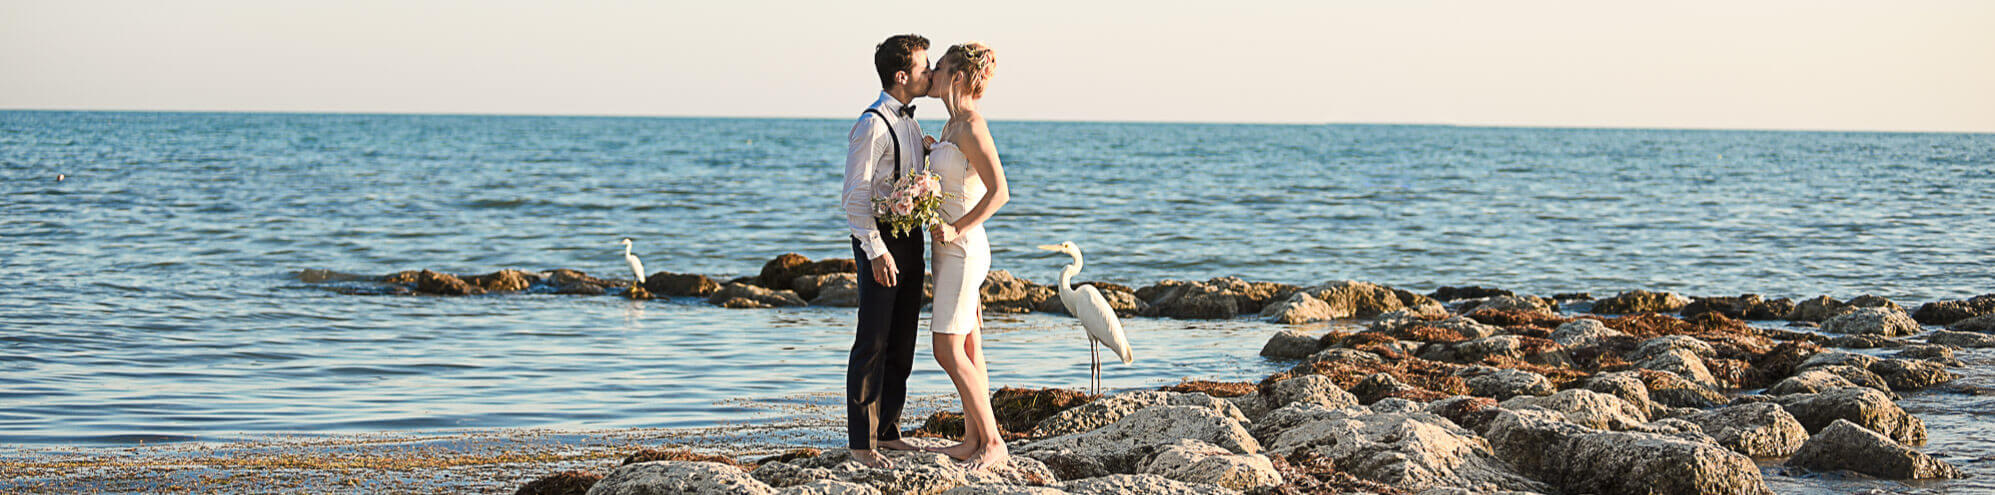 Florida marriage license by mail information couple standing on rocks